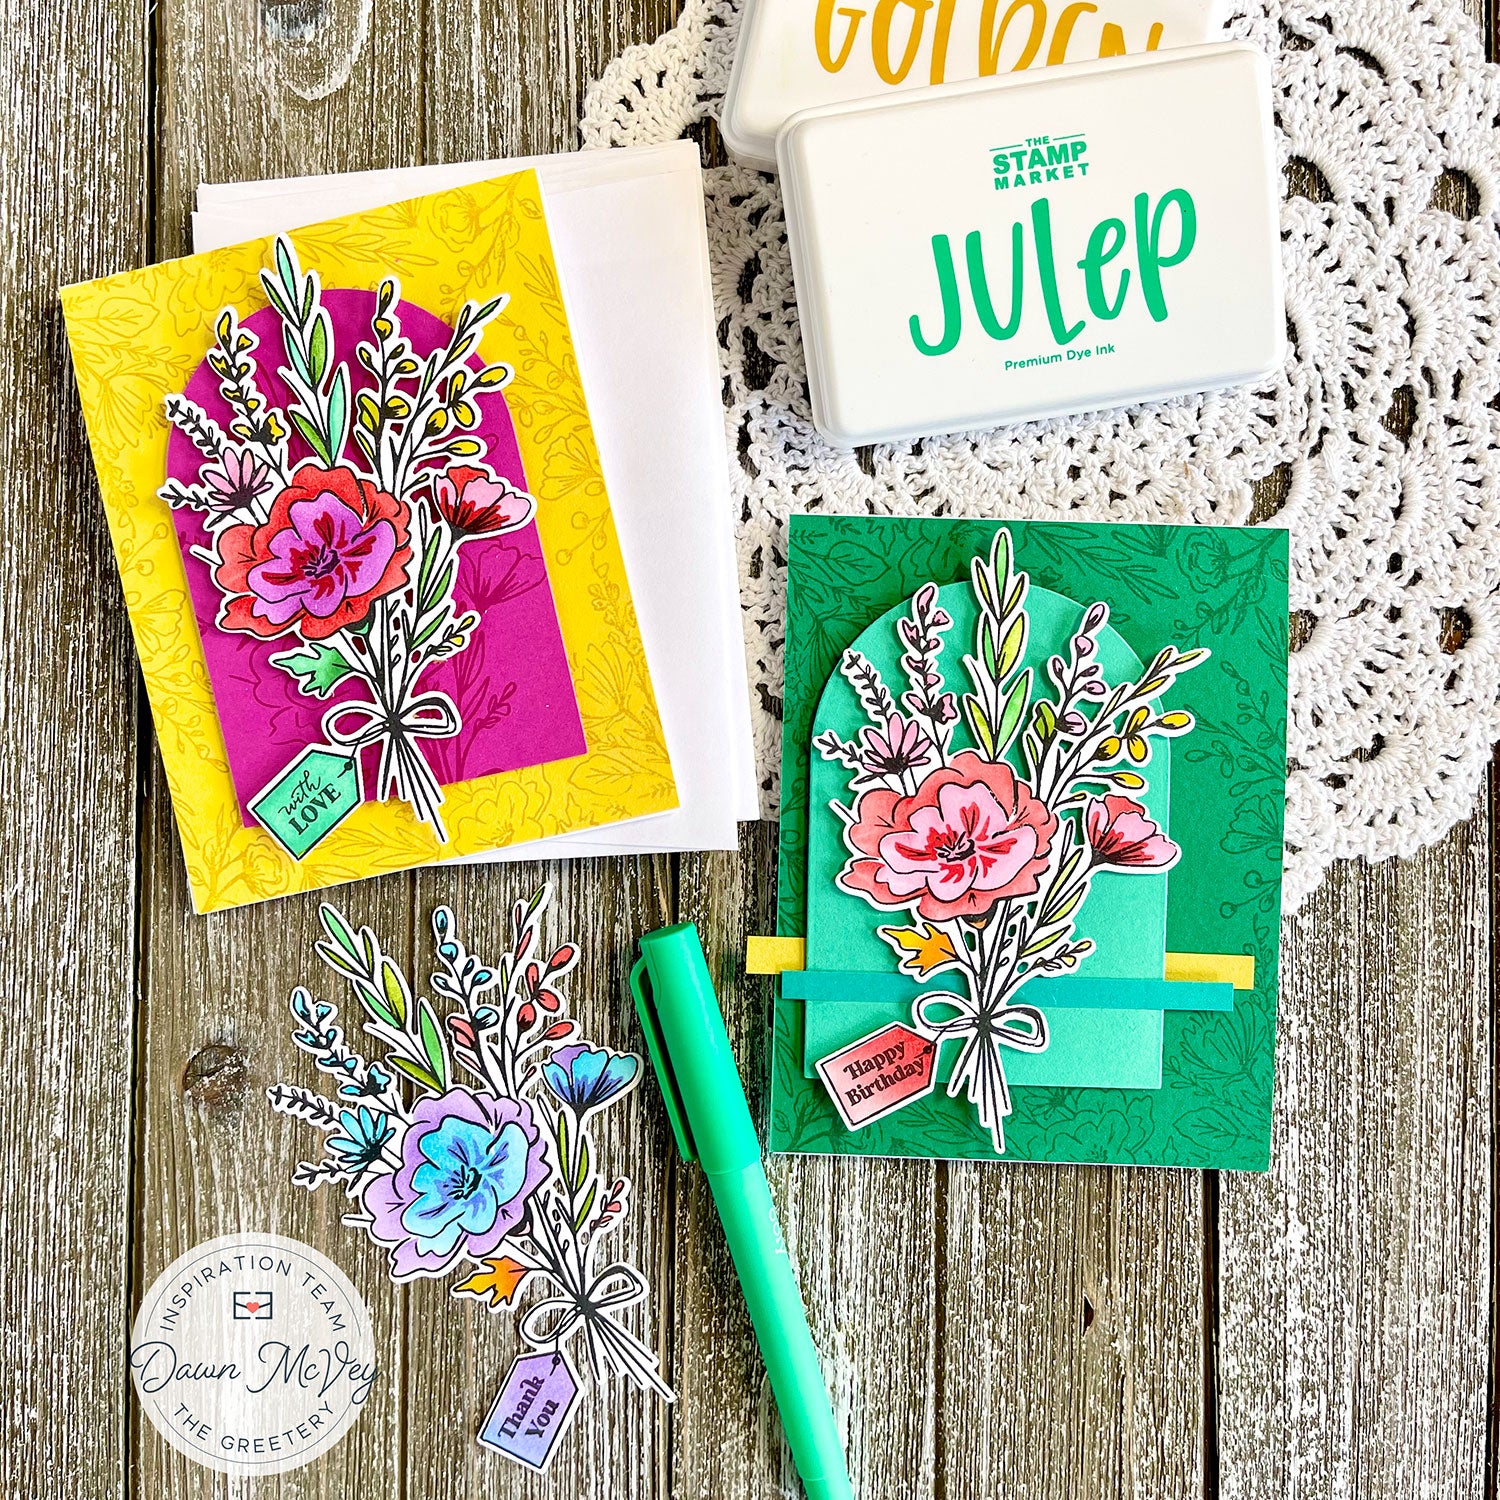 Custom Stamps from Expressionery + a Giveaway! - Green Wedding Shoes